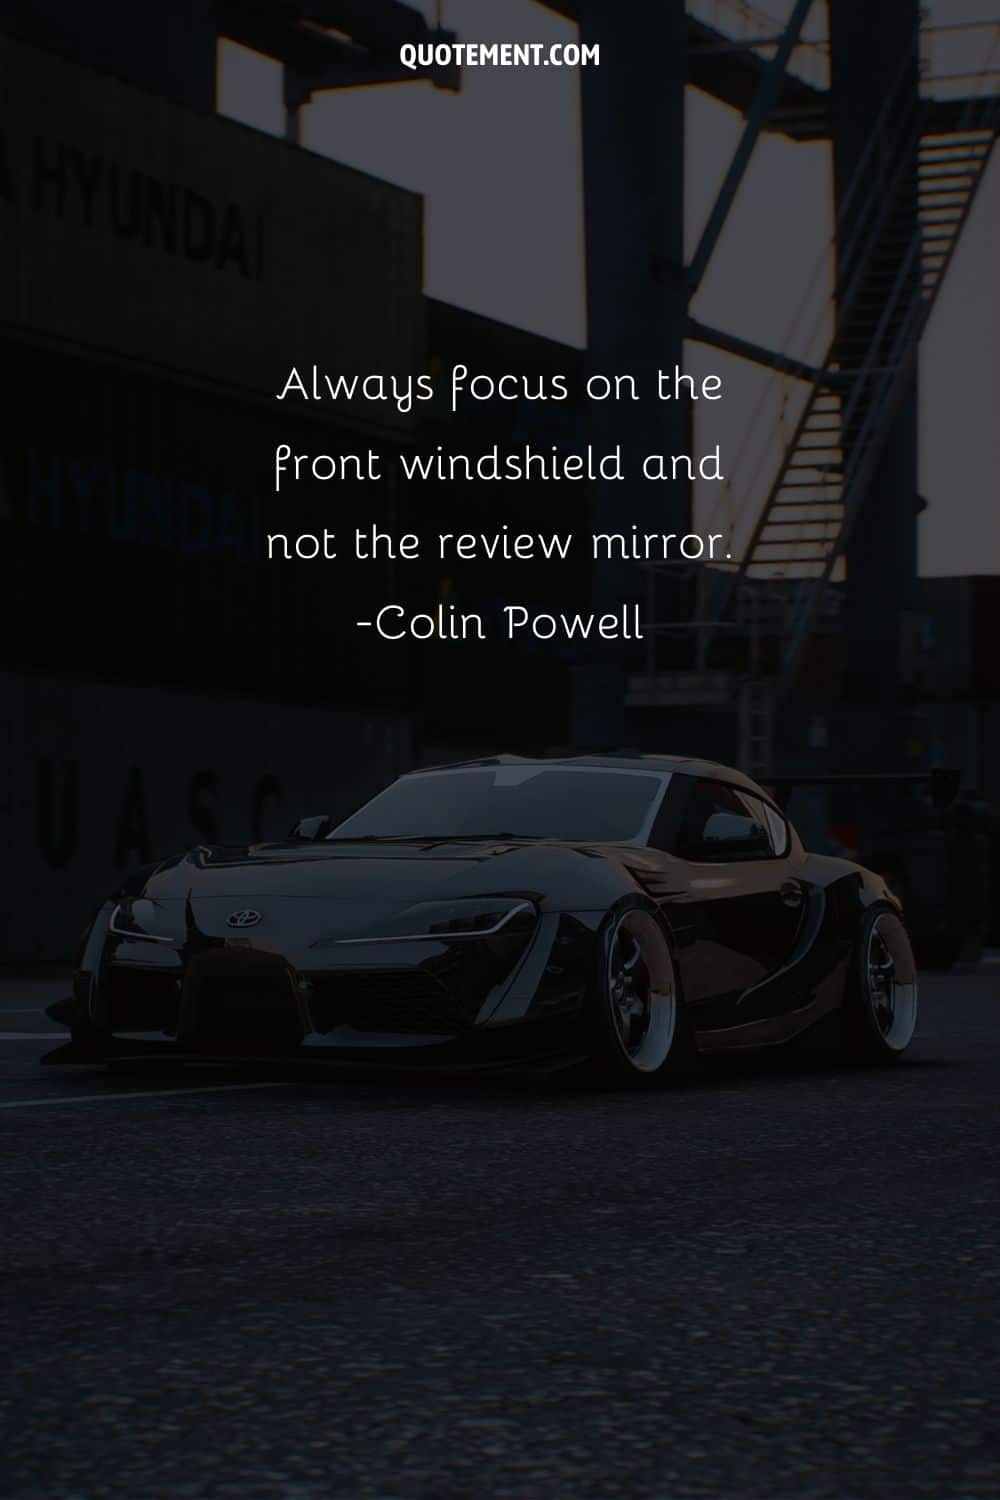 “Always focus on the front windshield and not the review mirror.”― Colin Powell